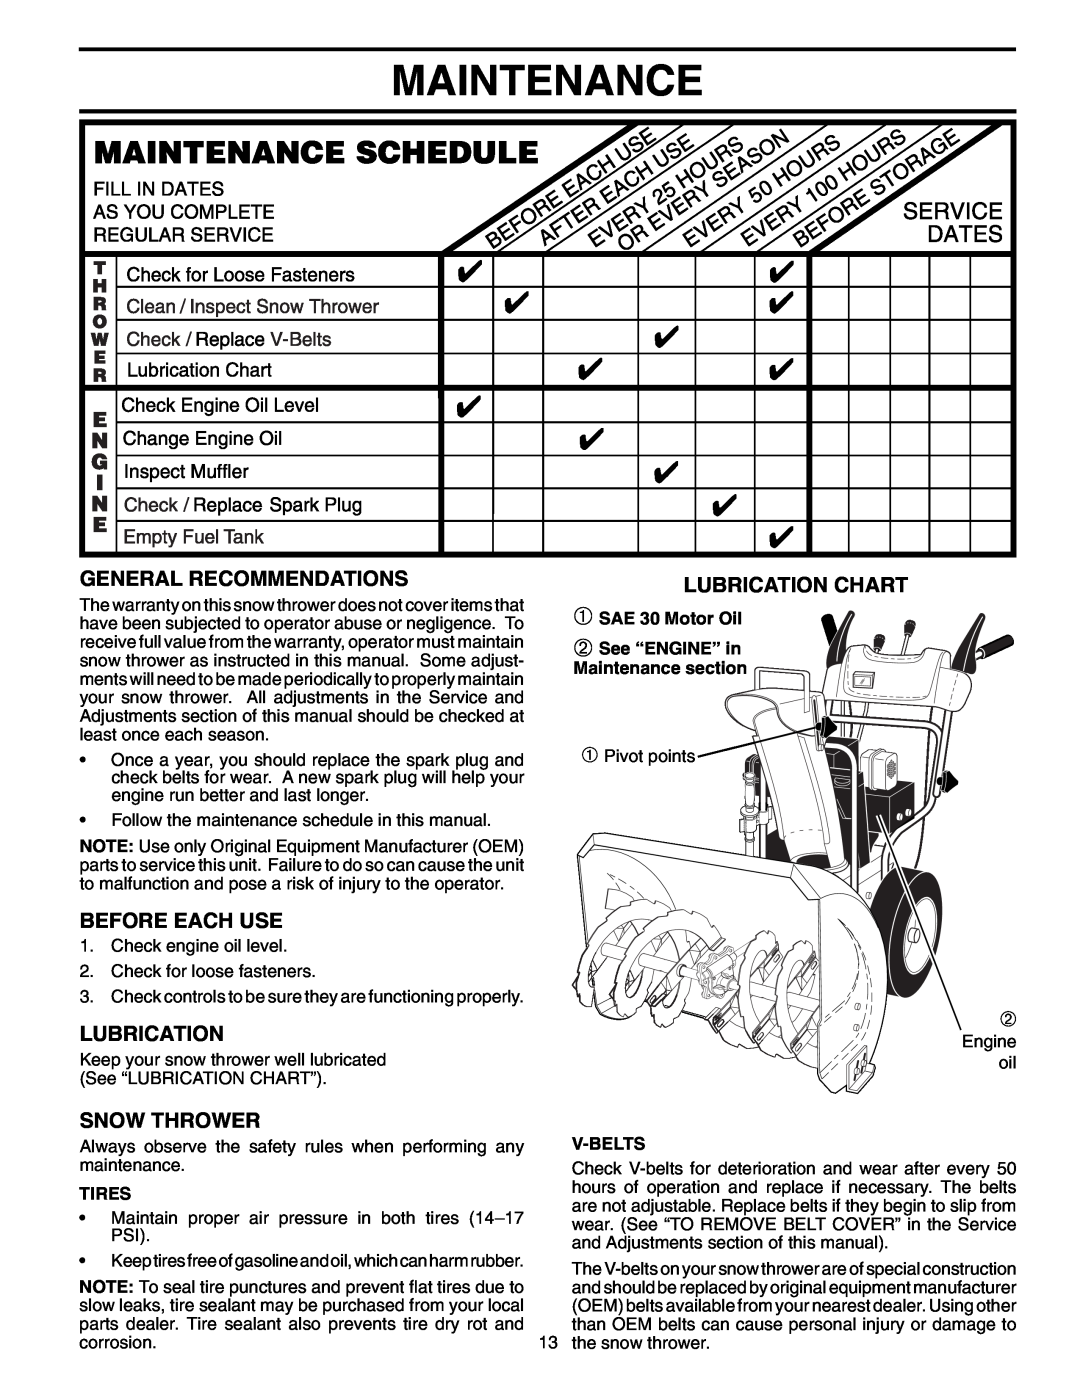 Poulan PR8527ES Maintenance, General Recommendations, Before Each Use, Lubrication Chart, Snow Thrower, Tires, V-Belts 